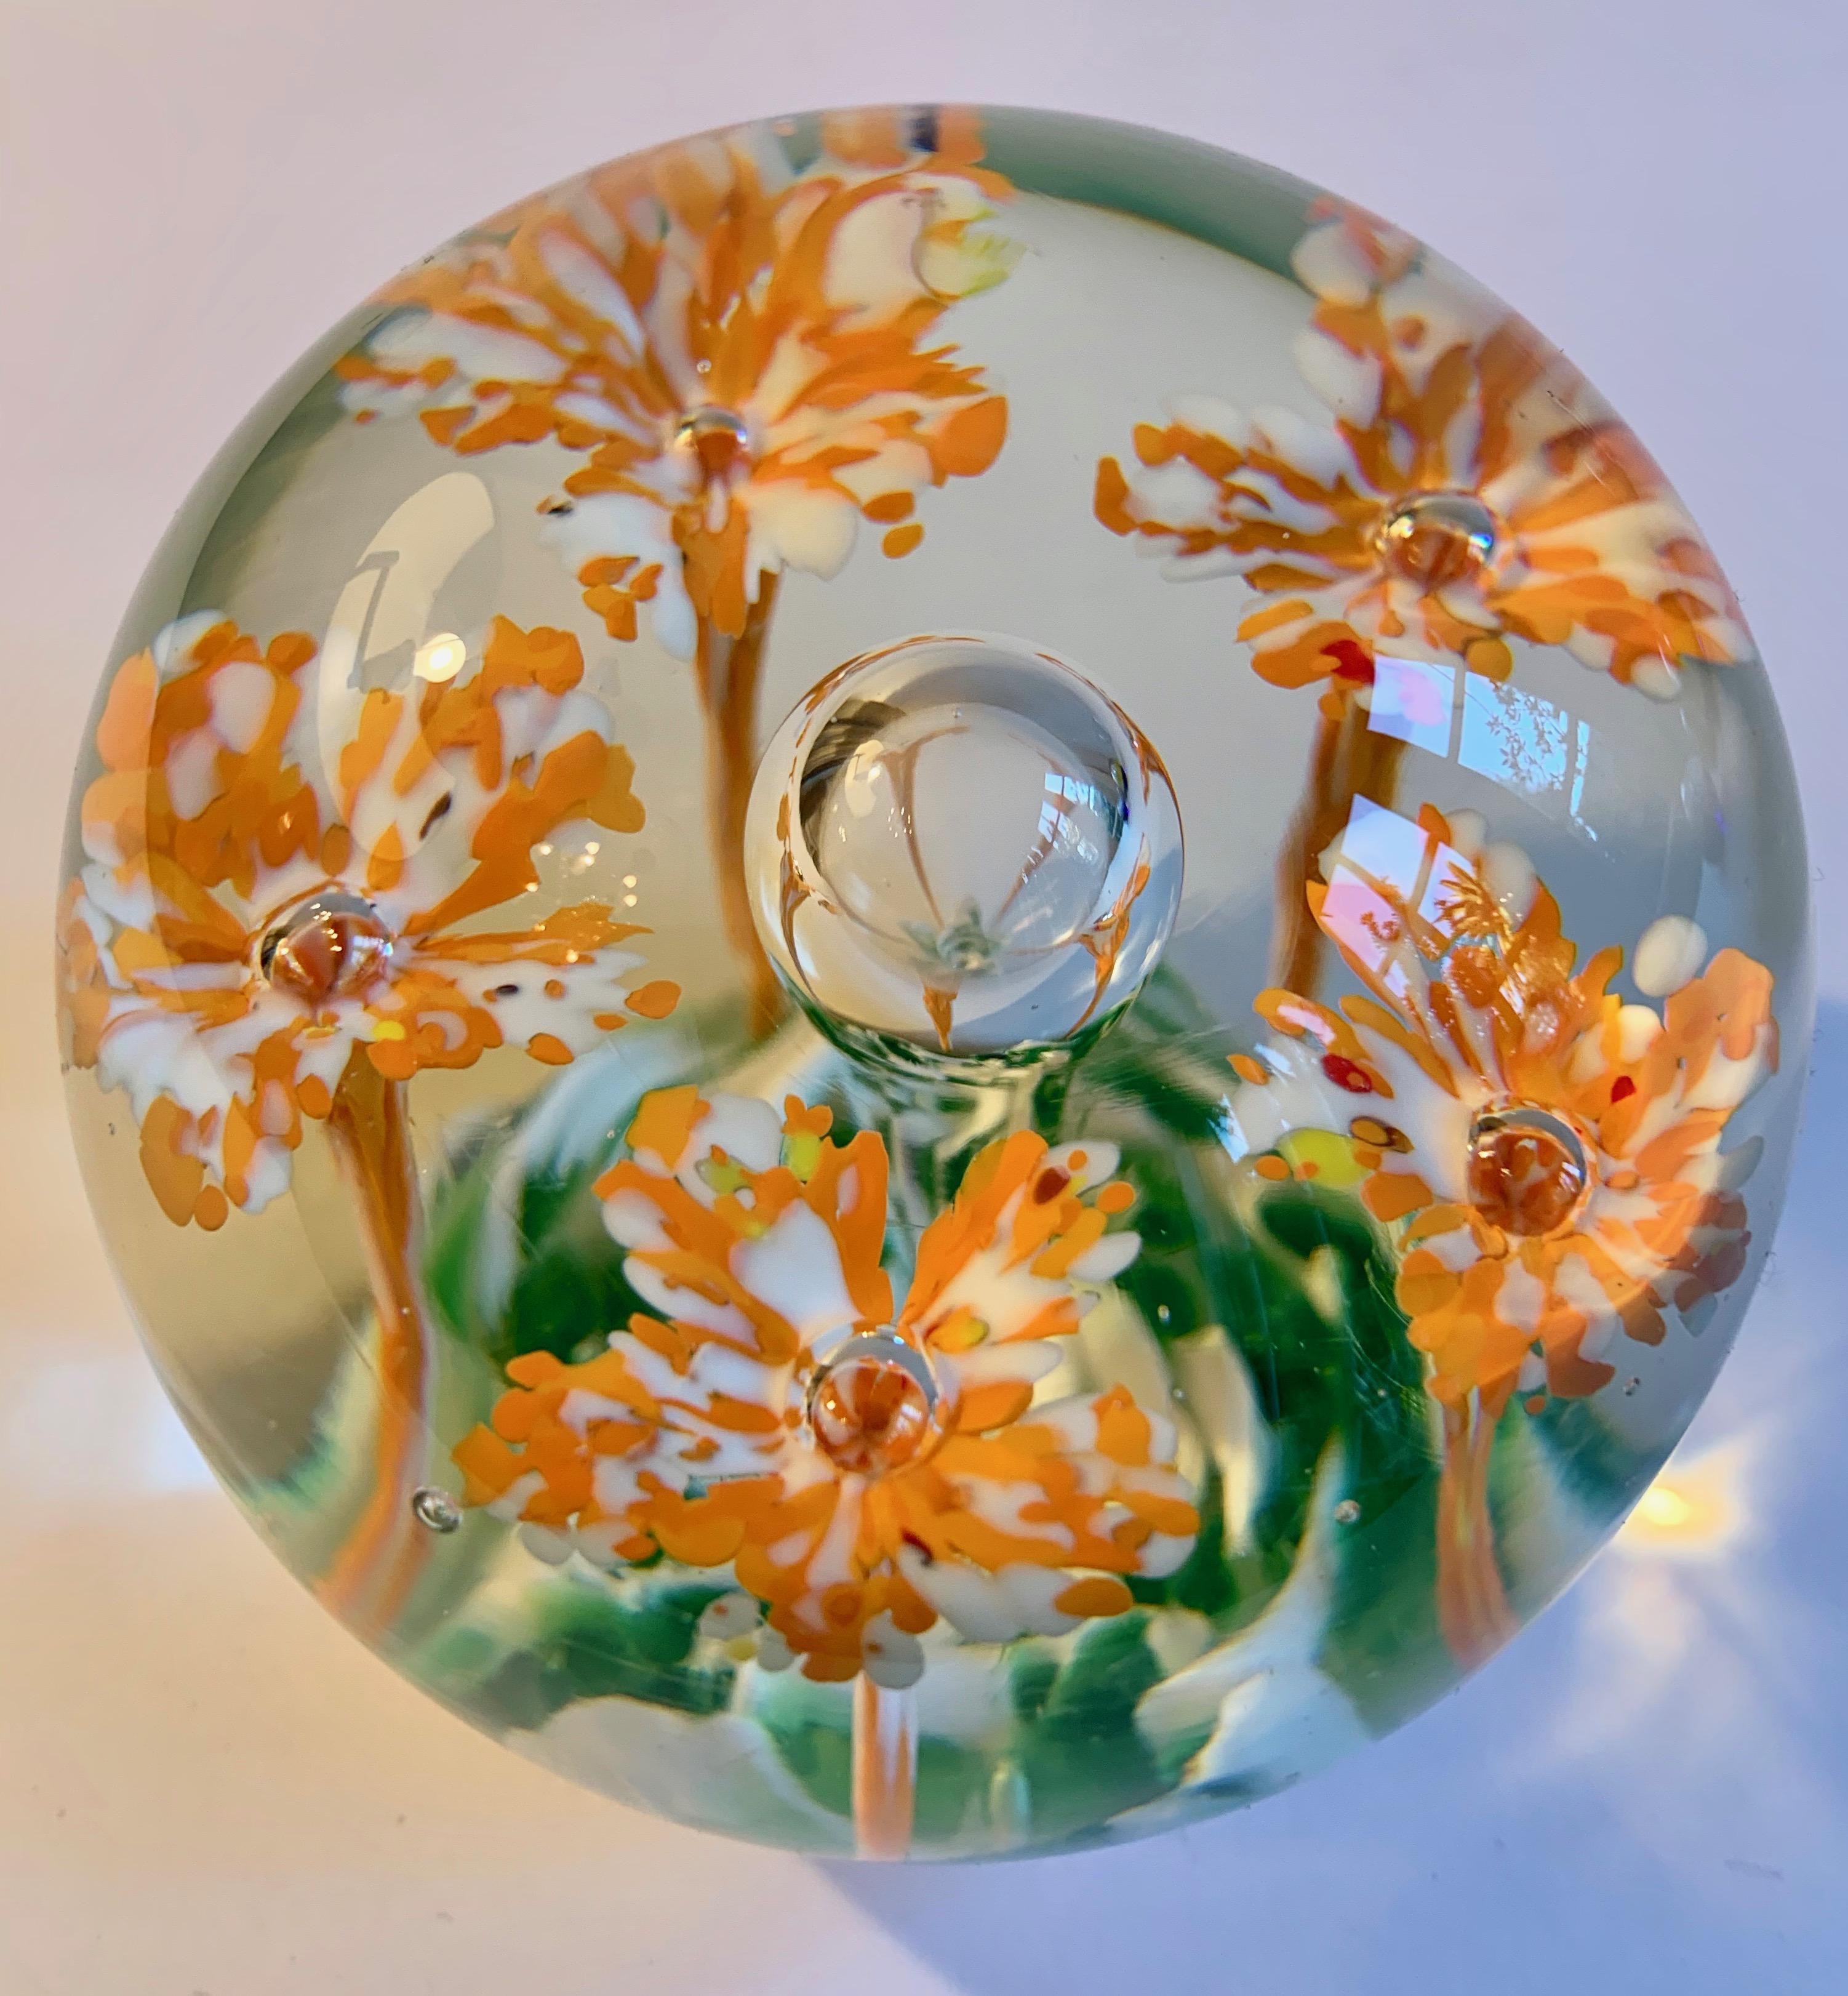 Murano orange flower paperweight - one of a kind and stunning.